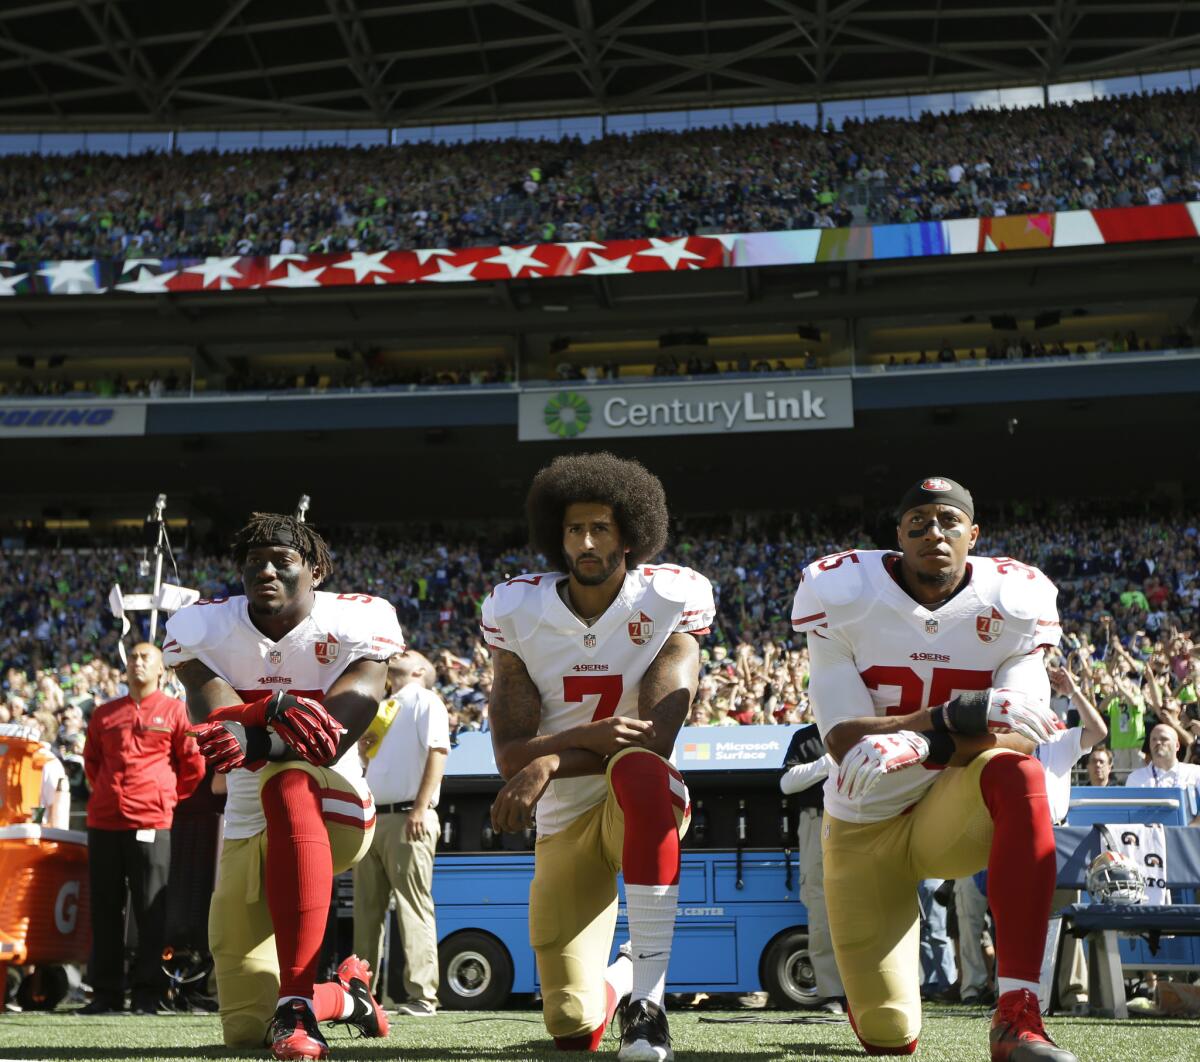 From left, San Francisco 49ers' Eli Harold, Colin Kaepernick and Eric Reid kneel during the national anthem before a NFL football game against the Seattle Seahawks at CenturyLink Field, Sunday, Sept. 25, 2016, in Seattle.